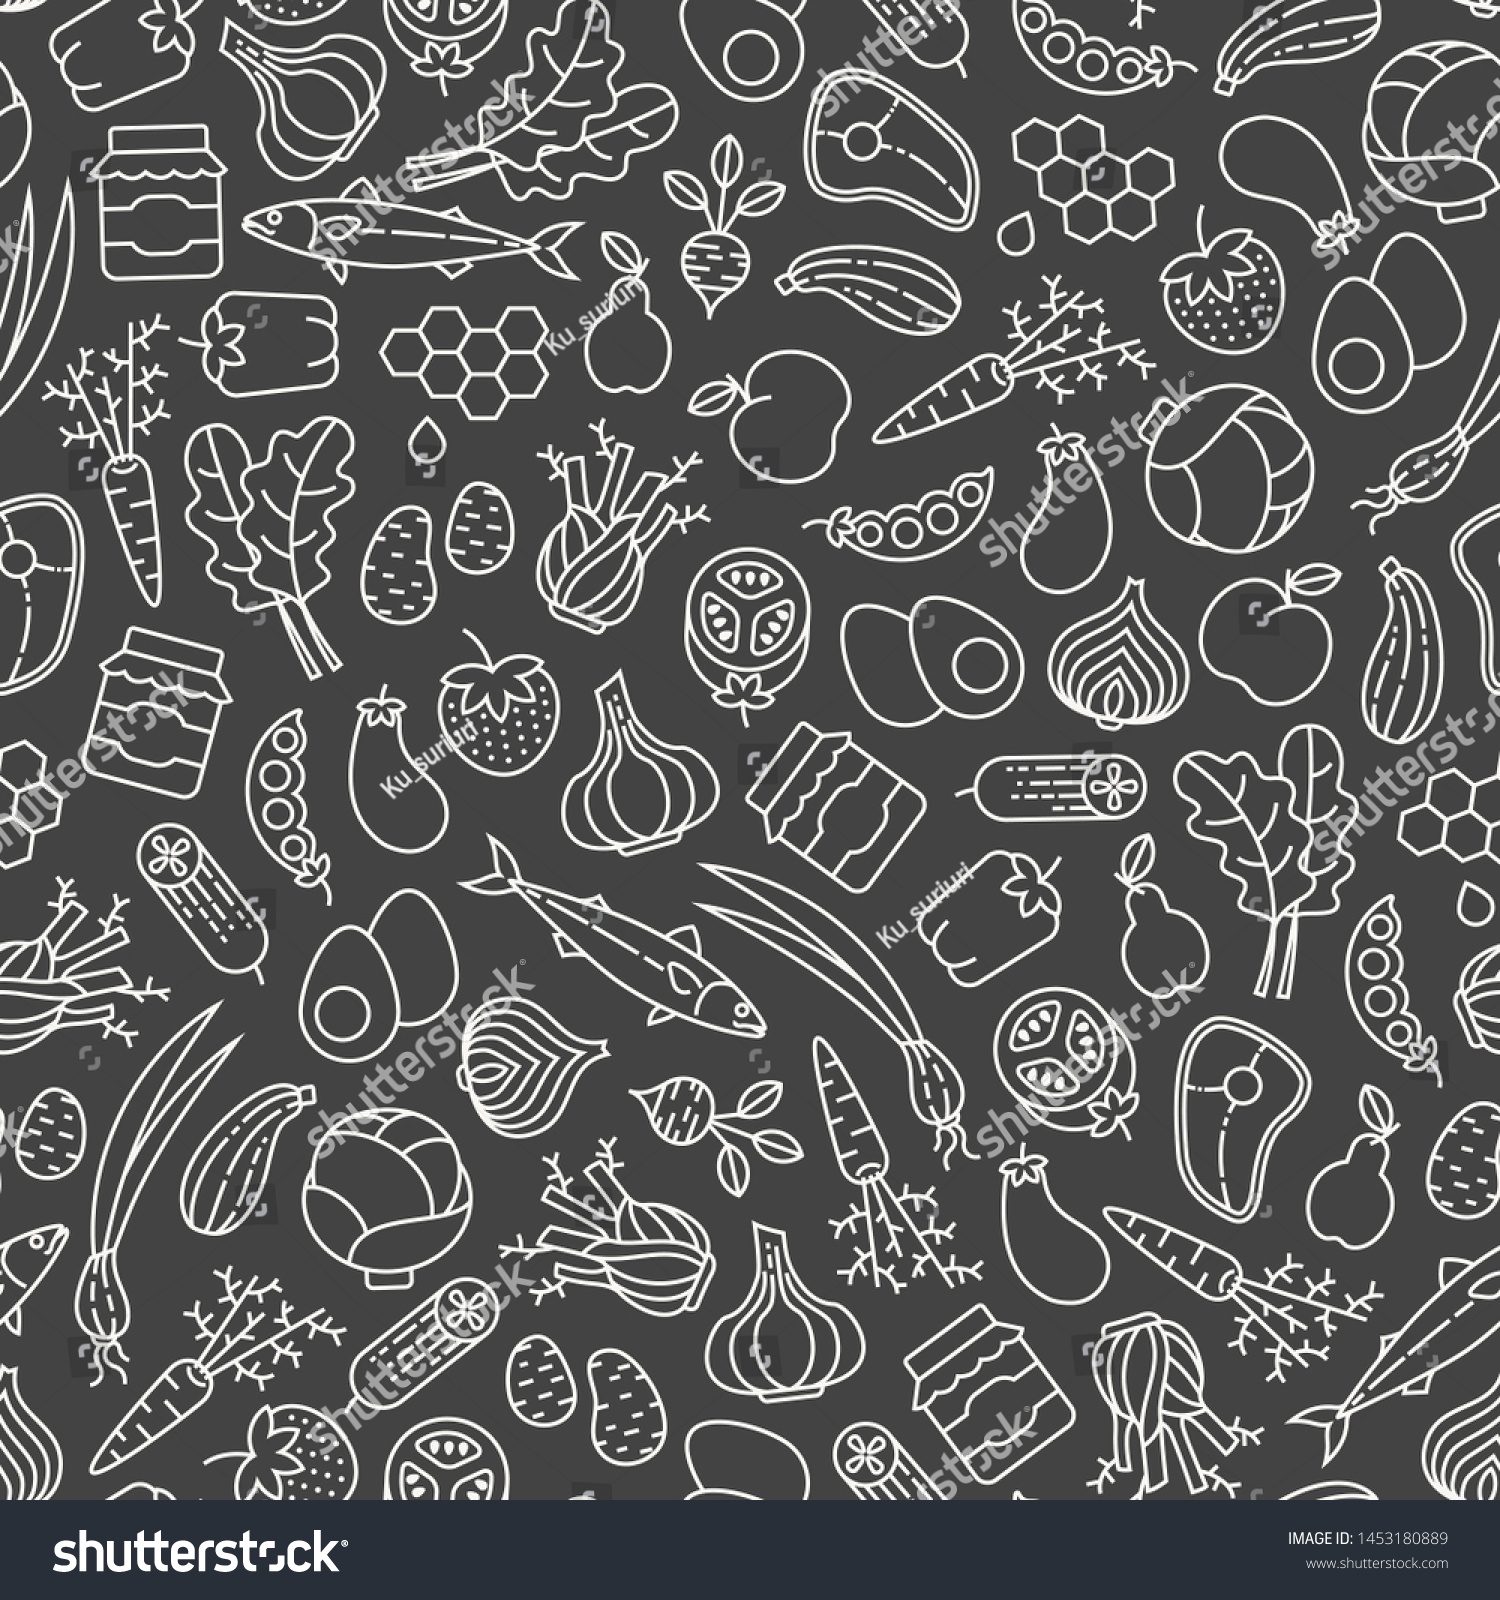 Farmer's market seamless pattern with line icons. Fruits, vegetables, honey, eggs, meat and fish #1453180889